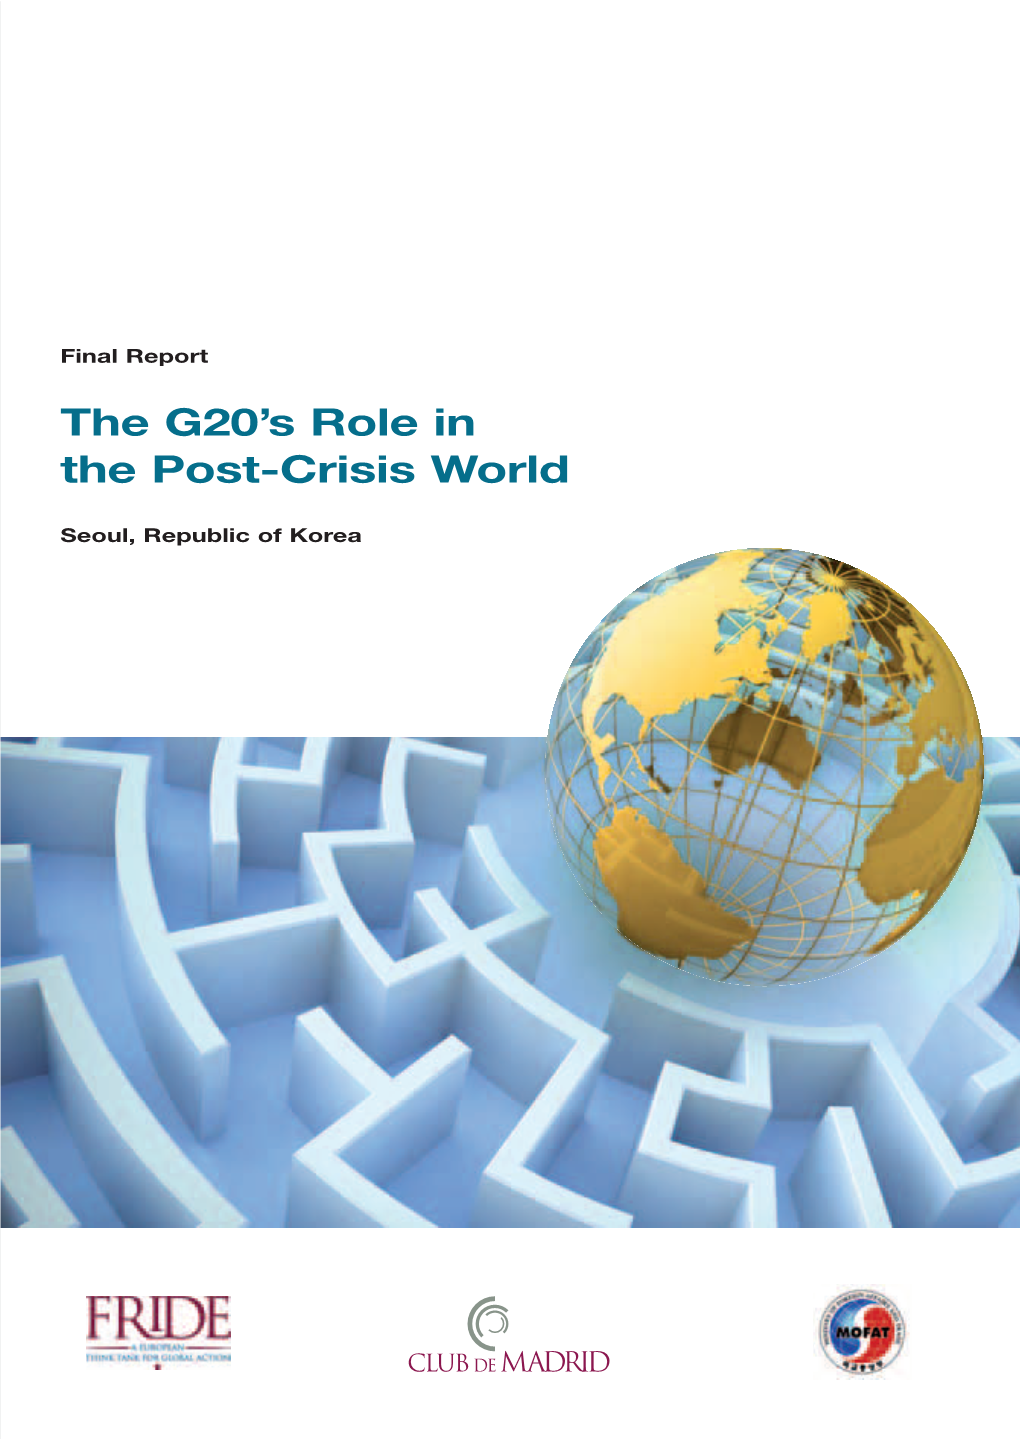 The G20's Role in a Post-Crisis World